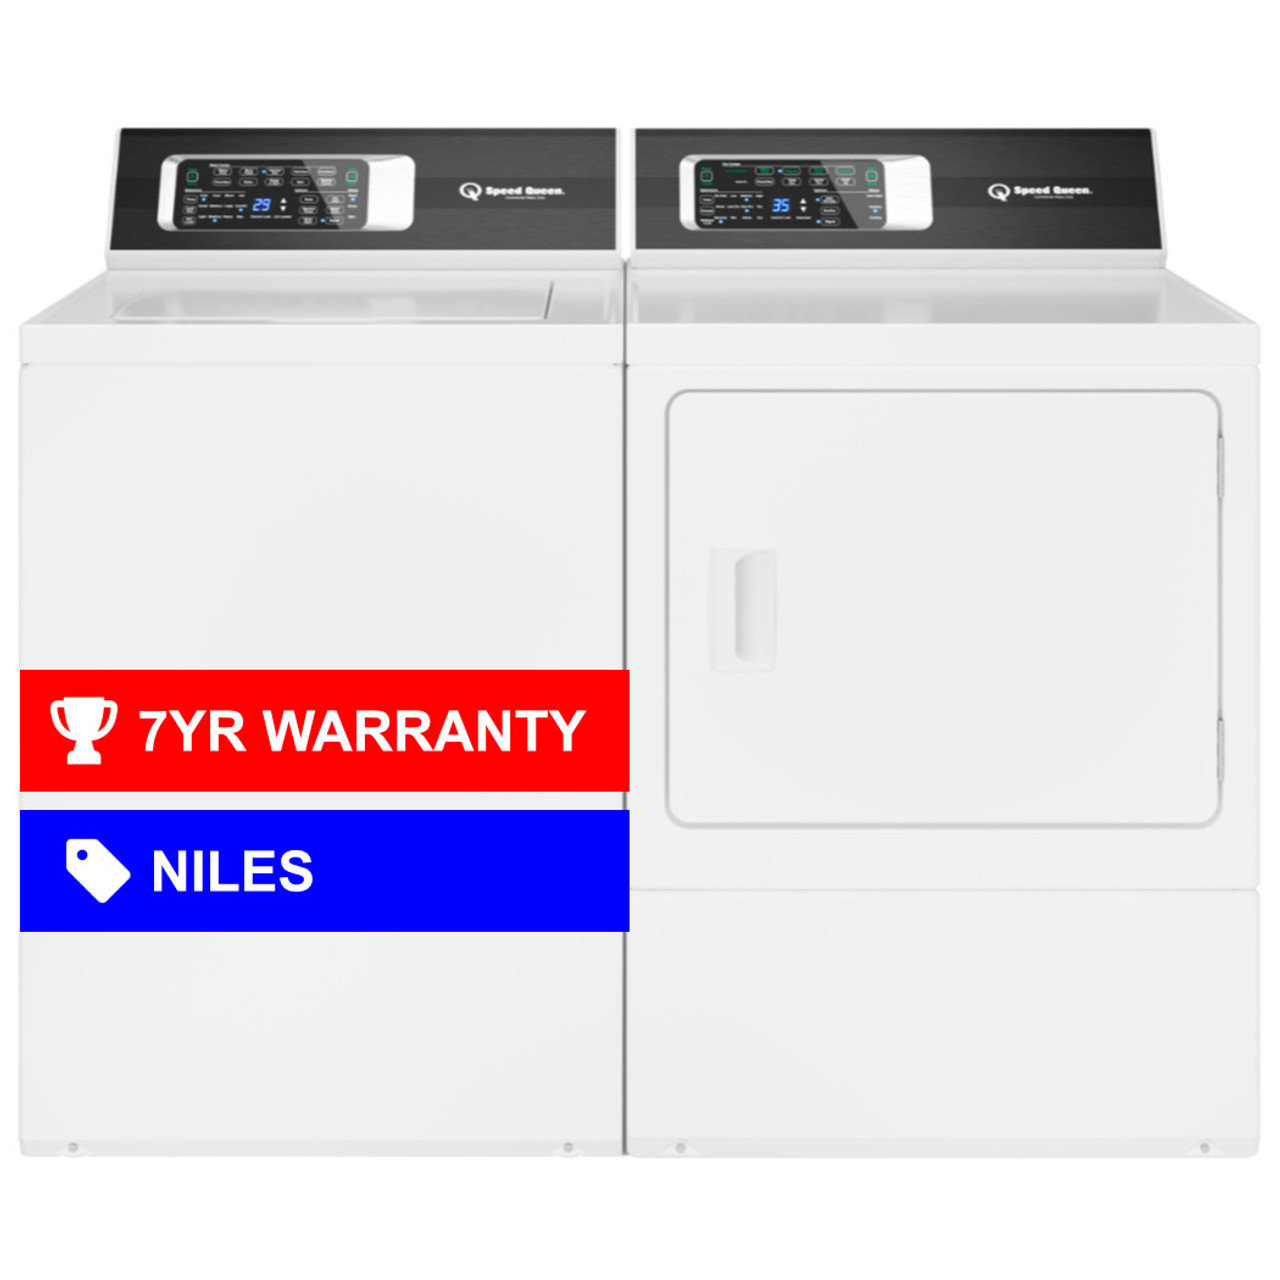 Speed Queen® TR7 3.2 Cu. Ft. Top Load Washer & 7.0 Cu. Ft. Electric Dryer  with 7 Year Warranty TR7003WN / DR7004WE